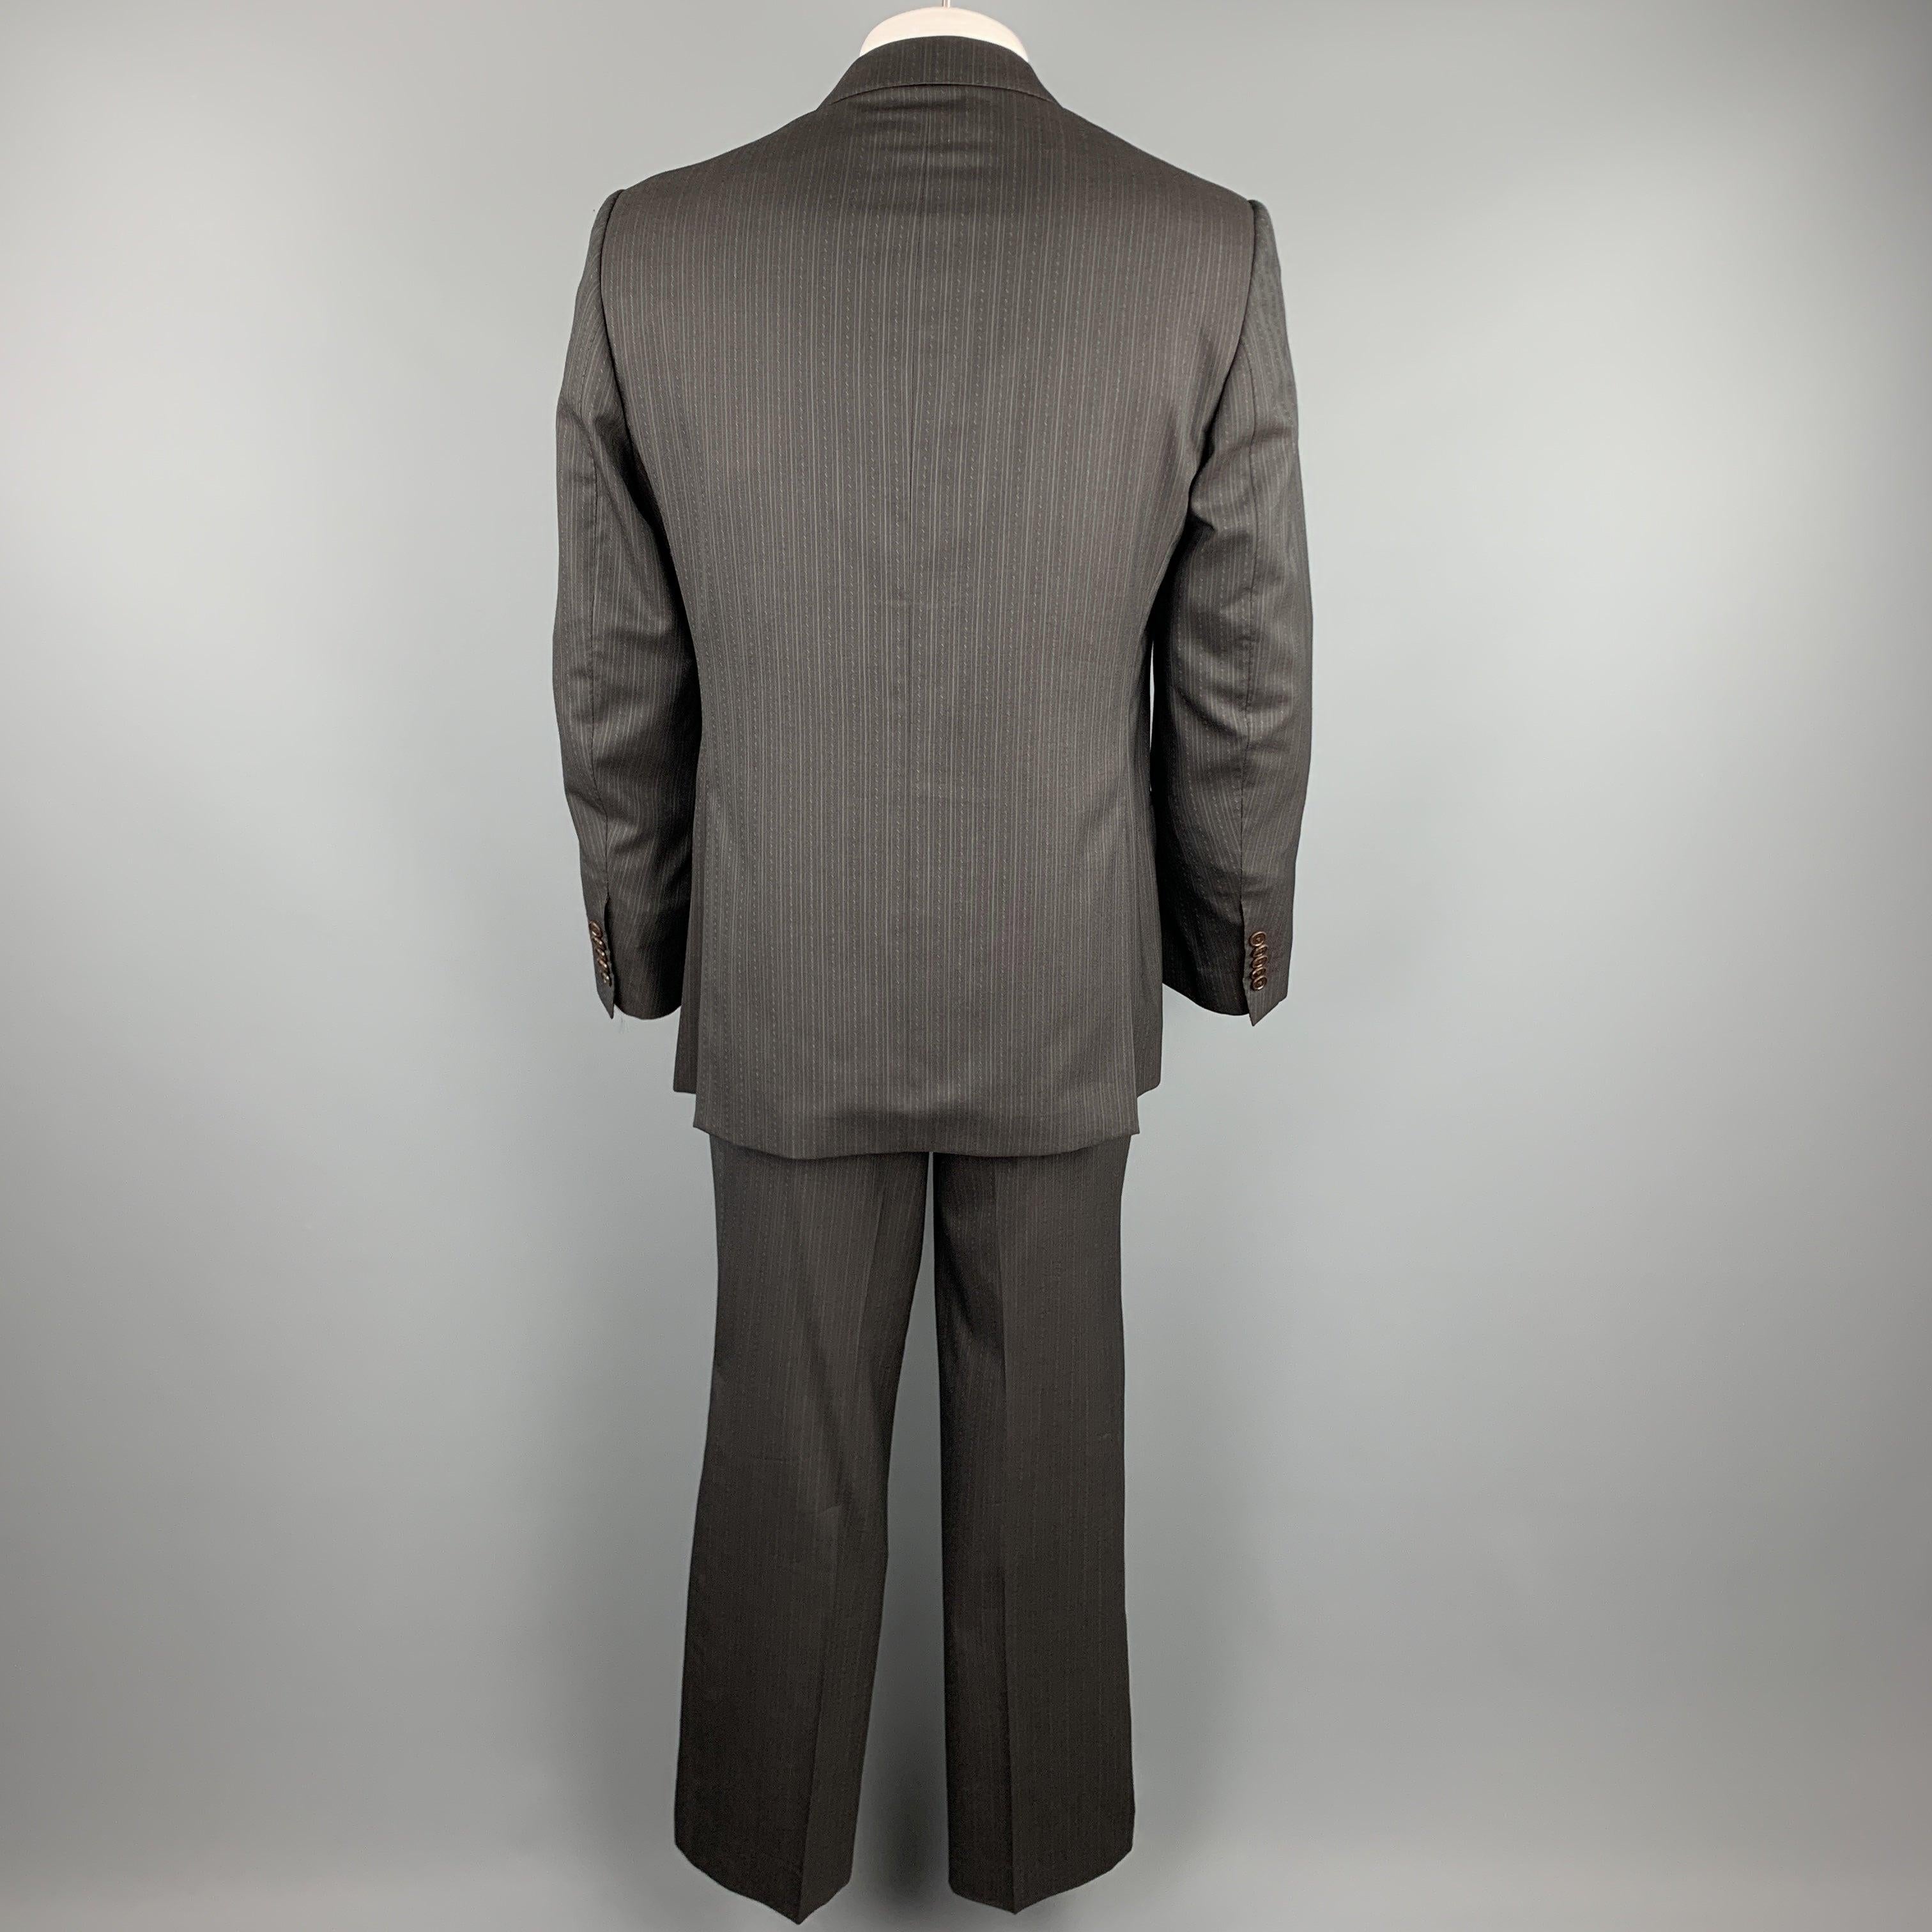 PAUL SMITH Size 42 Regular Brown Stripe Wool Notch Lapel Suit In Excellent Condition For Sale In San Francisco, CA